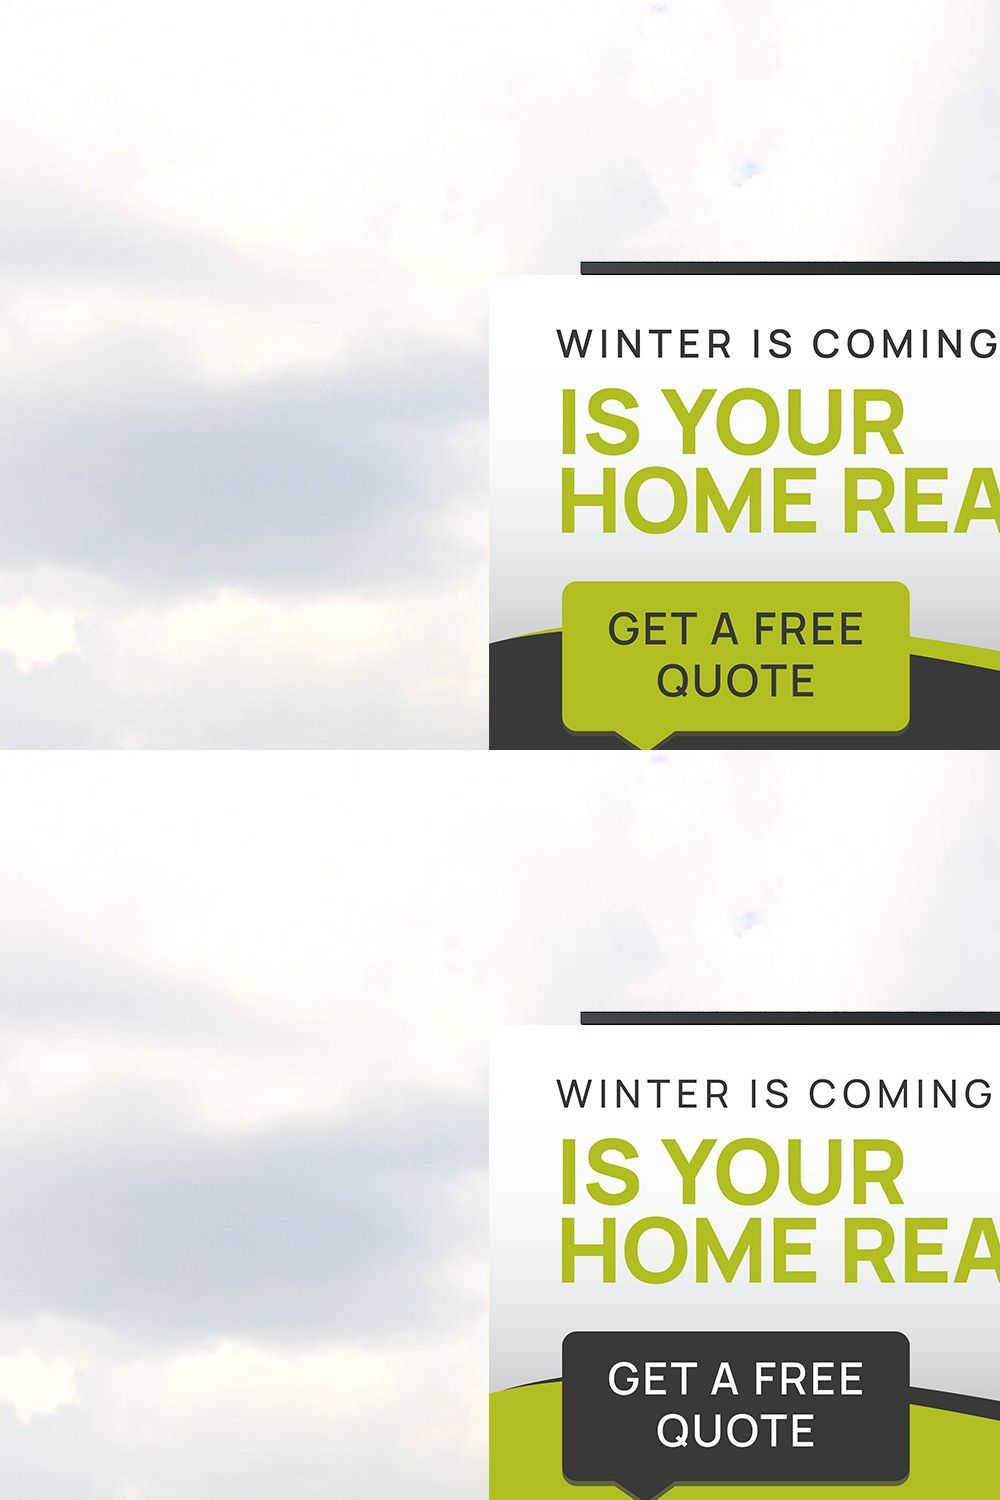 Home Insulation Service Billboard pinterest preview image.